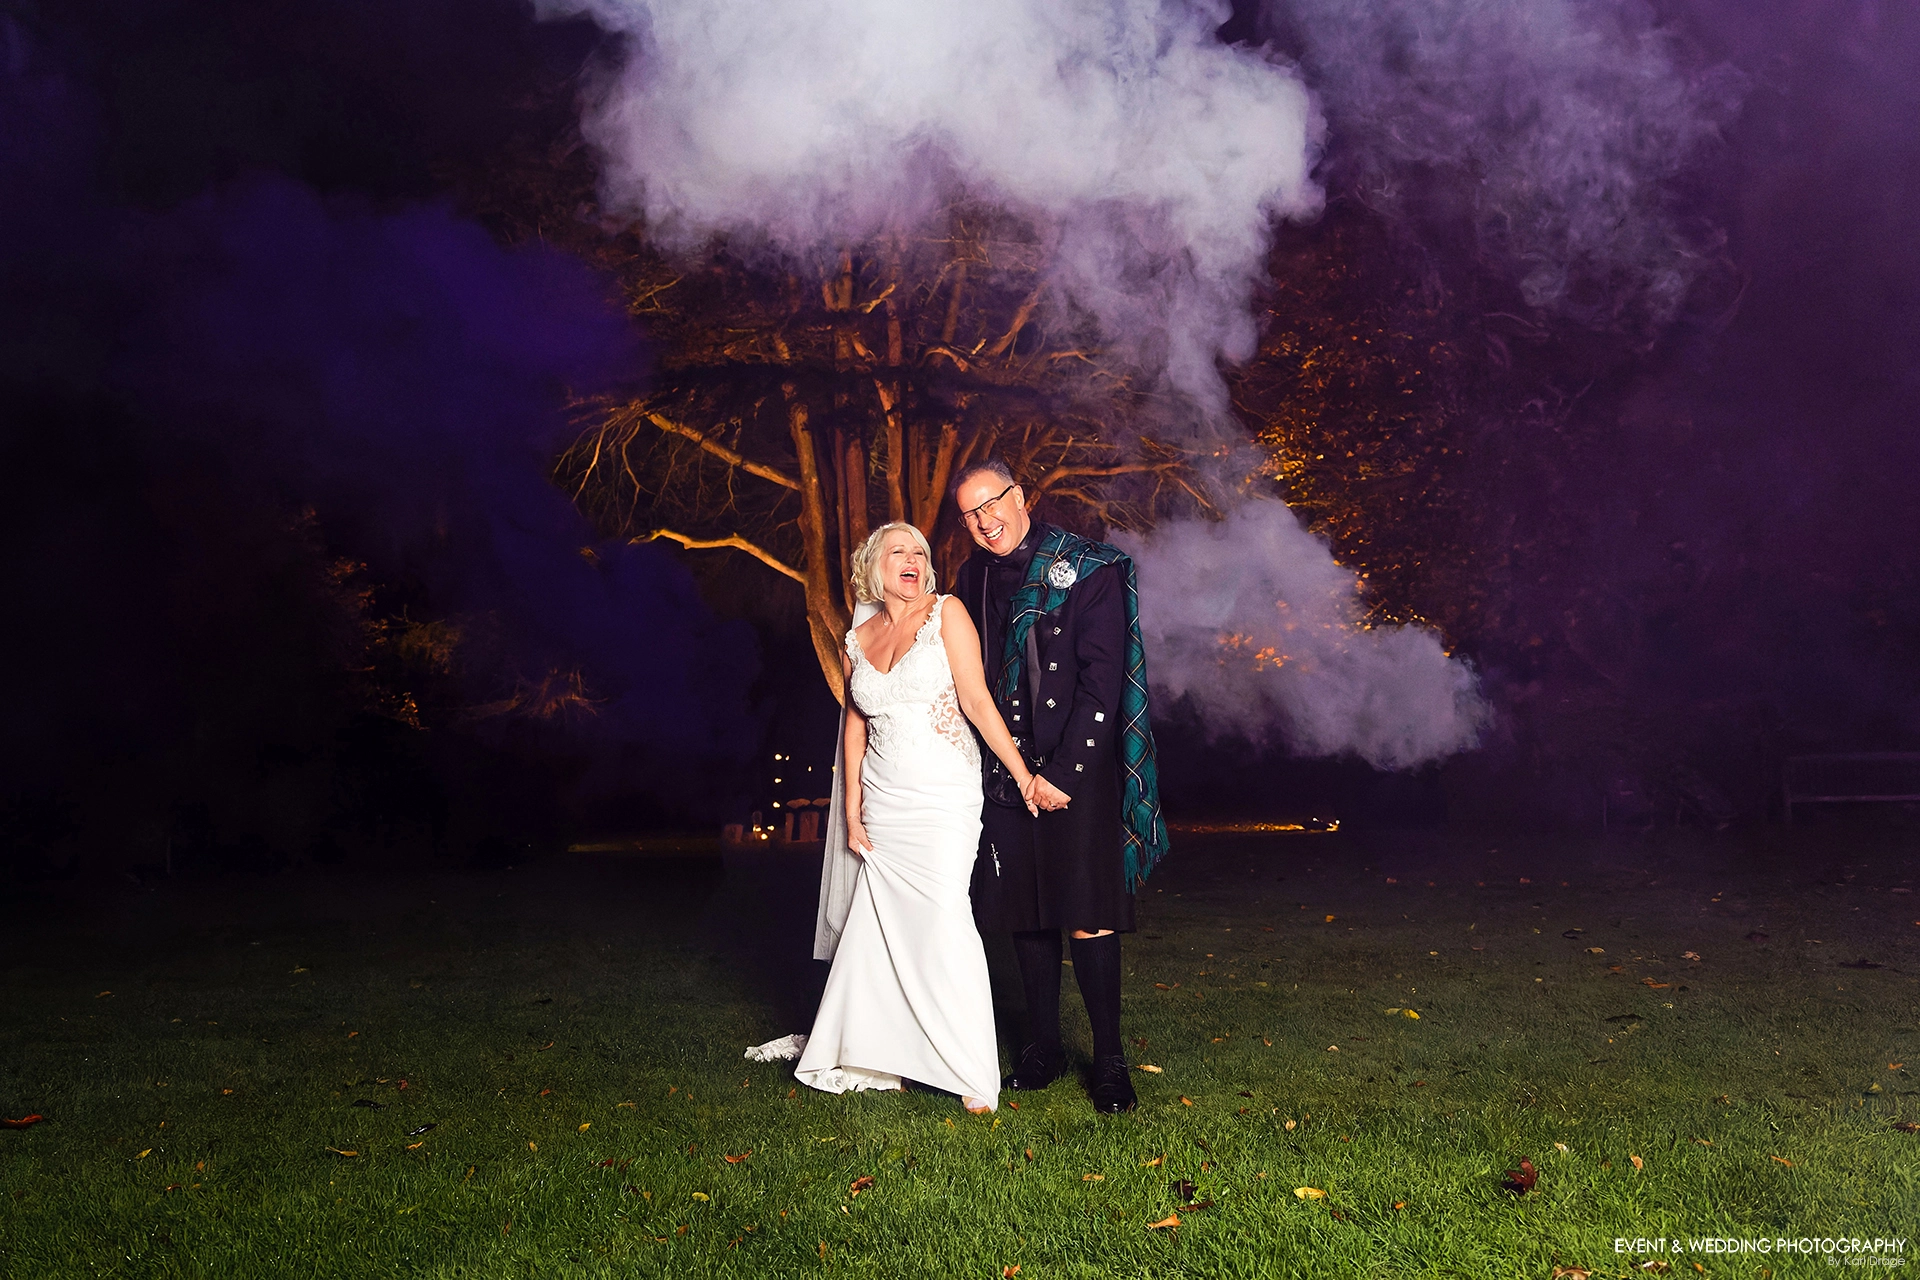 A bride and groom share a joke after dark in the grounds of Ansty Hall with purple and white smoke behind them